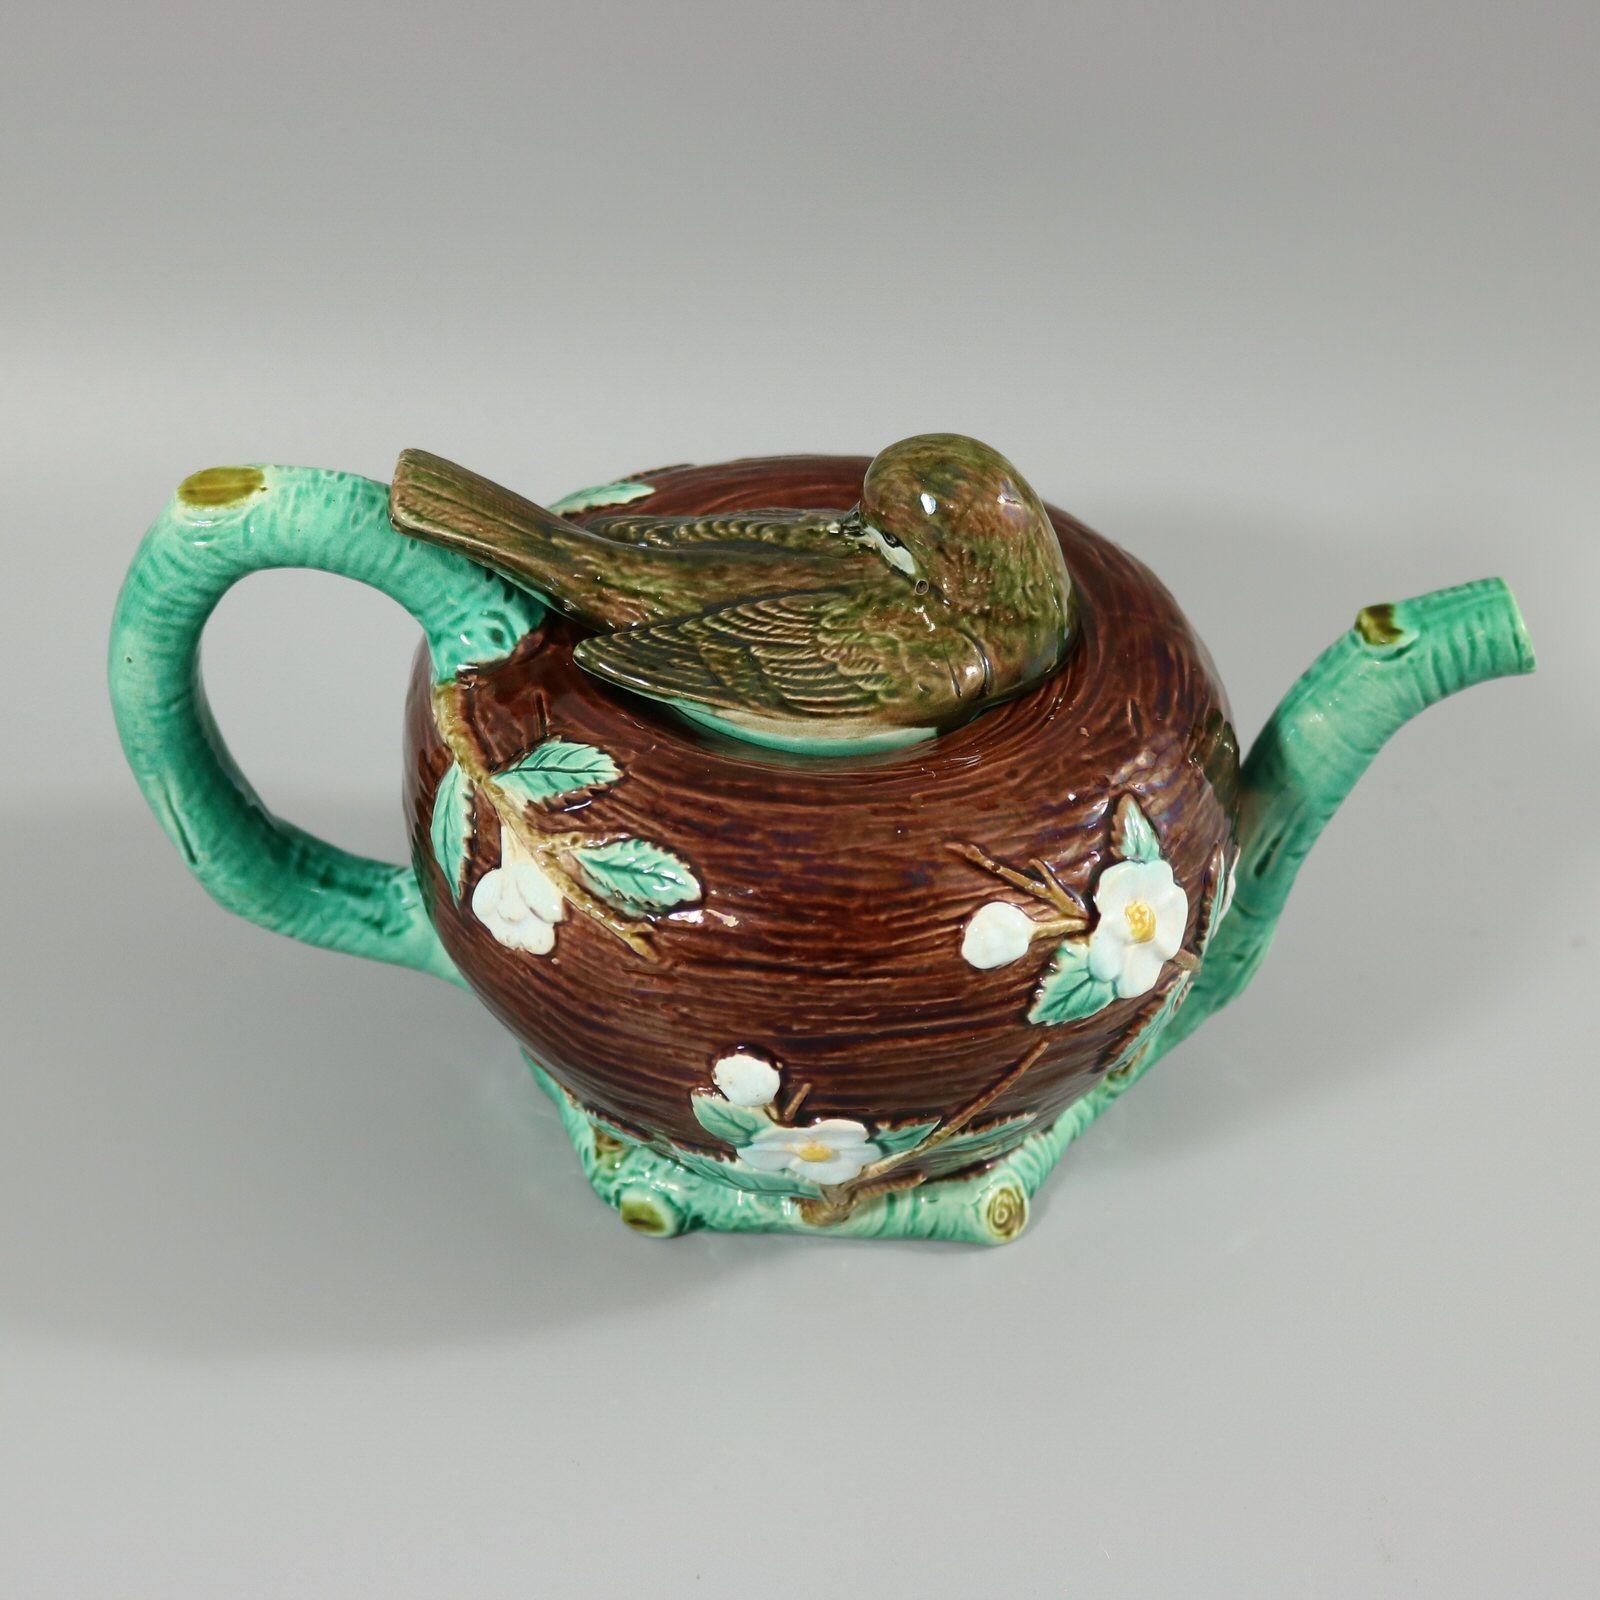 Joseph Holdcroft Majolica Bird on Nest Teapot In Excellent Condition For Sale In Chelmsford, Essex